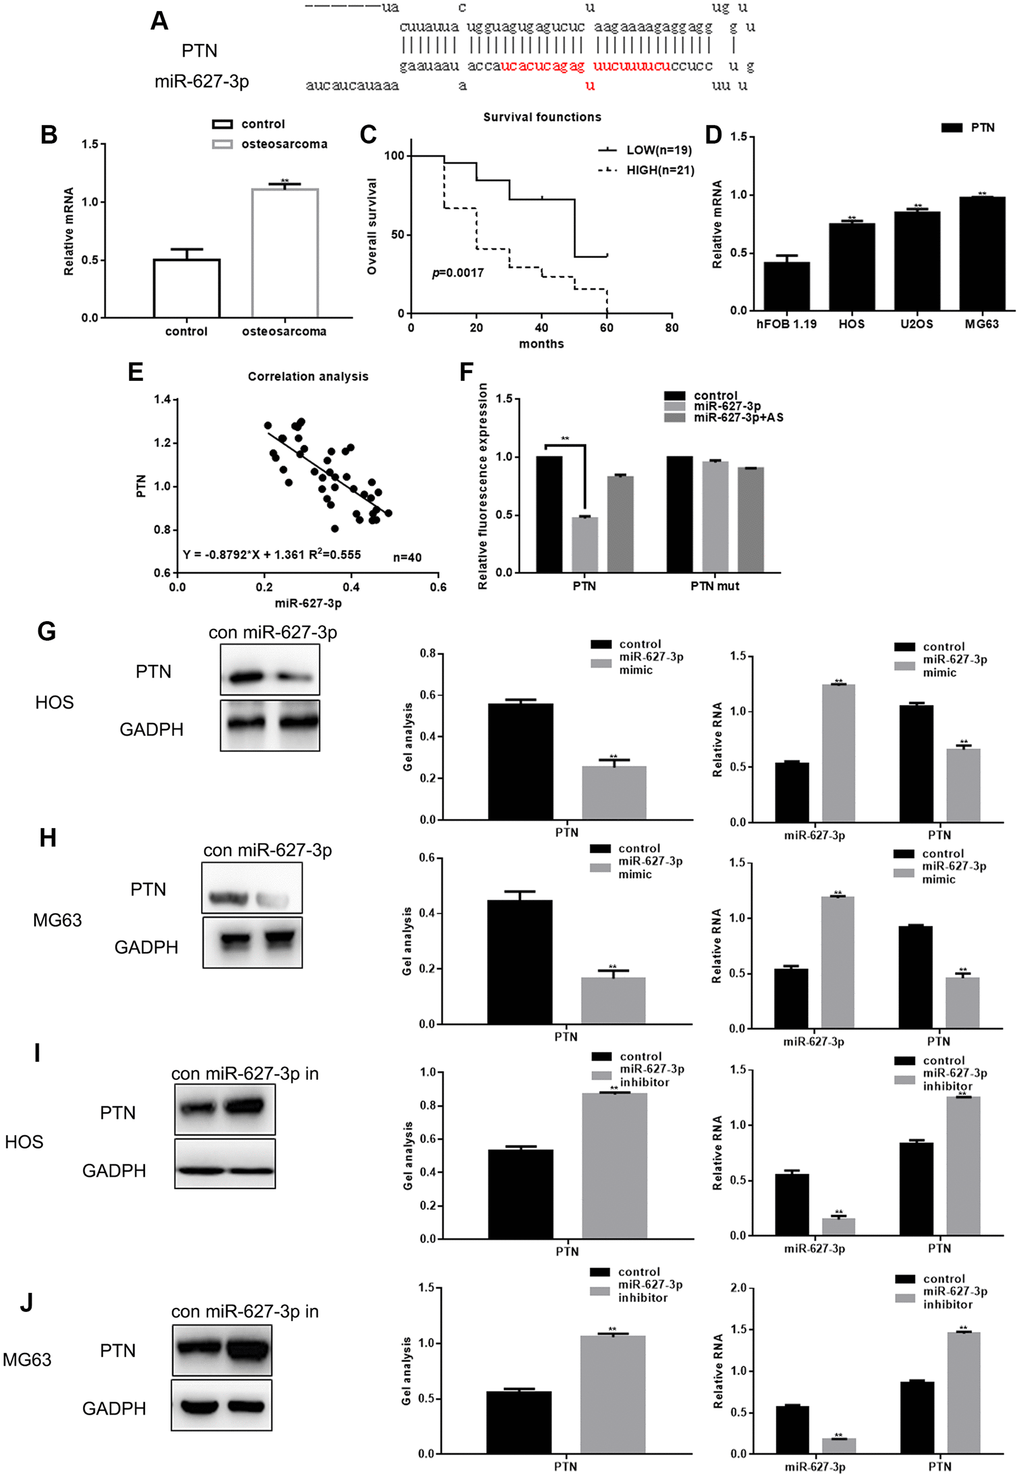 PTN is a direct target of miR-627-3p in osteosarcoma. (A) miRDB predicted that miR-627-3p could be specifically combined with PTN. (B) Real time PCR analysis of PTN mRNA expression in osteosarcoma tissues and adjacent tissues. Data are the mean ± SEM. ** PC) Relationship between PTN and survival period among osteosarcoma patients. (D) Real time PCR analysis of PTN expression in hFOB 1.19, HOS, U2OS and MG63 cells. ** PE) Correlation between expression of miR-627-3p and PTN in osteosarcoma. (F) Luciferase reporter assays testing the interaction between miR-627-3p and the PTN 3′-UTR. Data are the mean ± SEM. ** PG–J) Western blot and real time PCR analyses showing expression of PTN after miR-627-3p overexpression or inhibition. Data are shown as the mean ± SEM. ** P